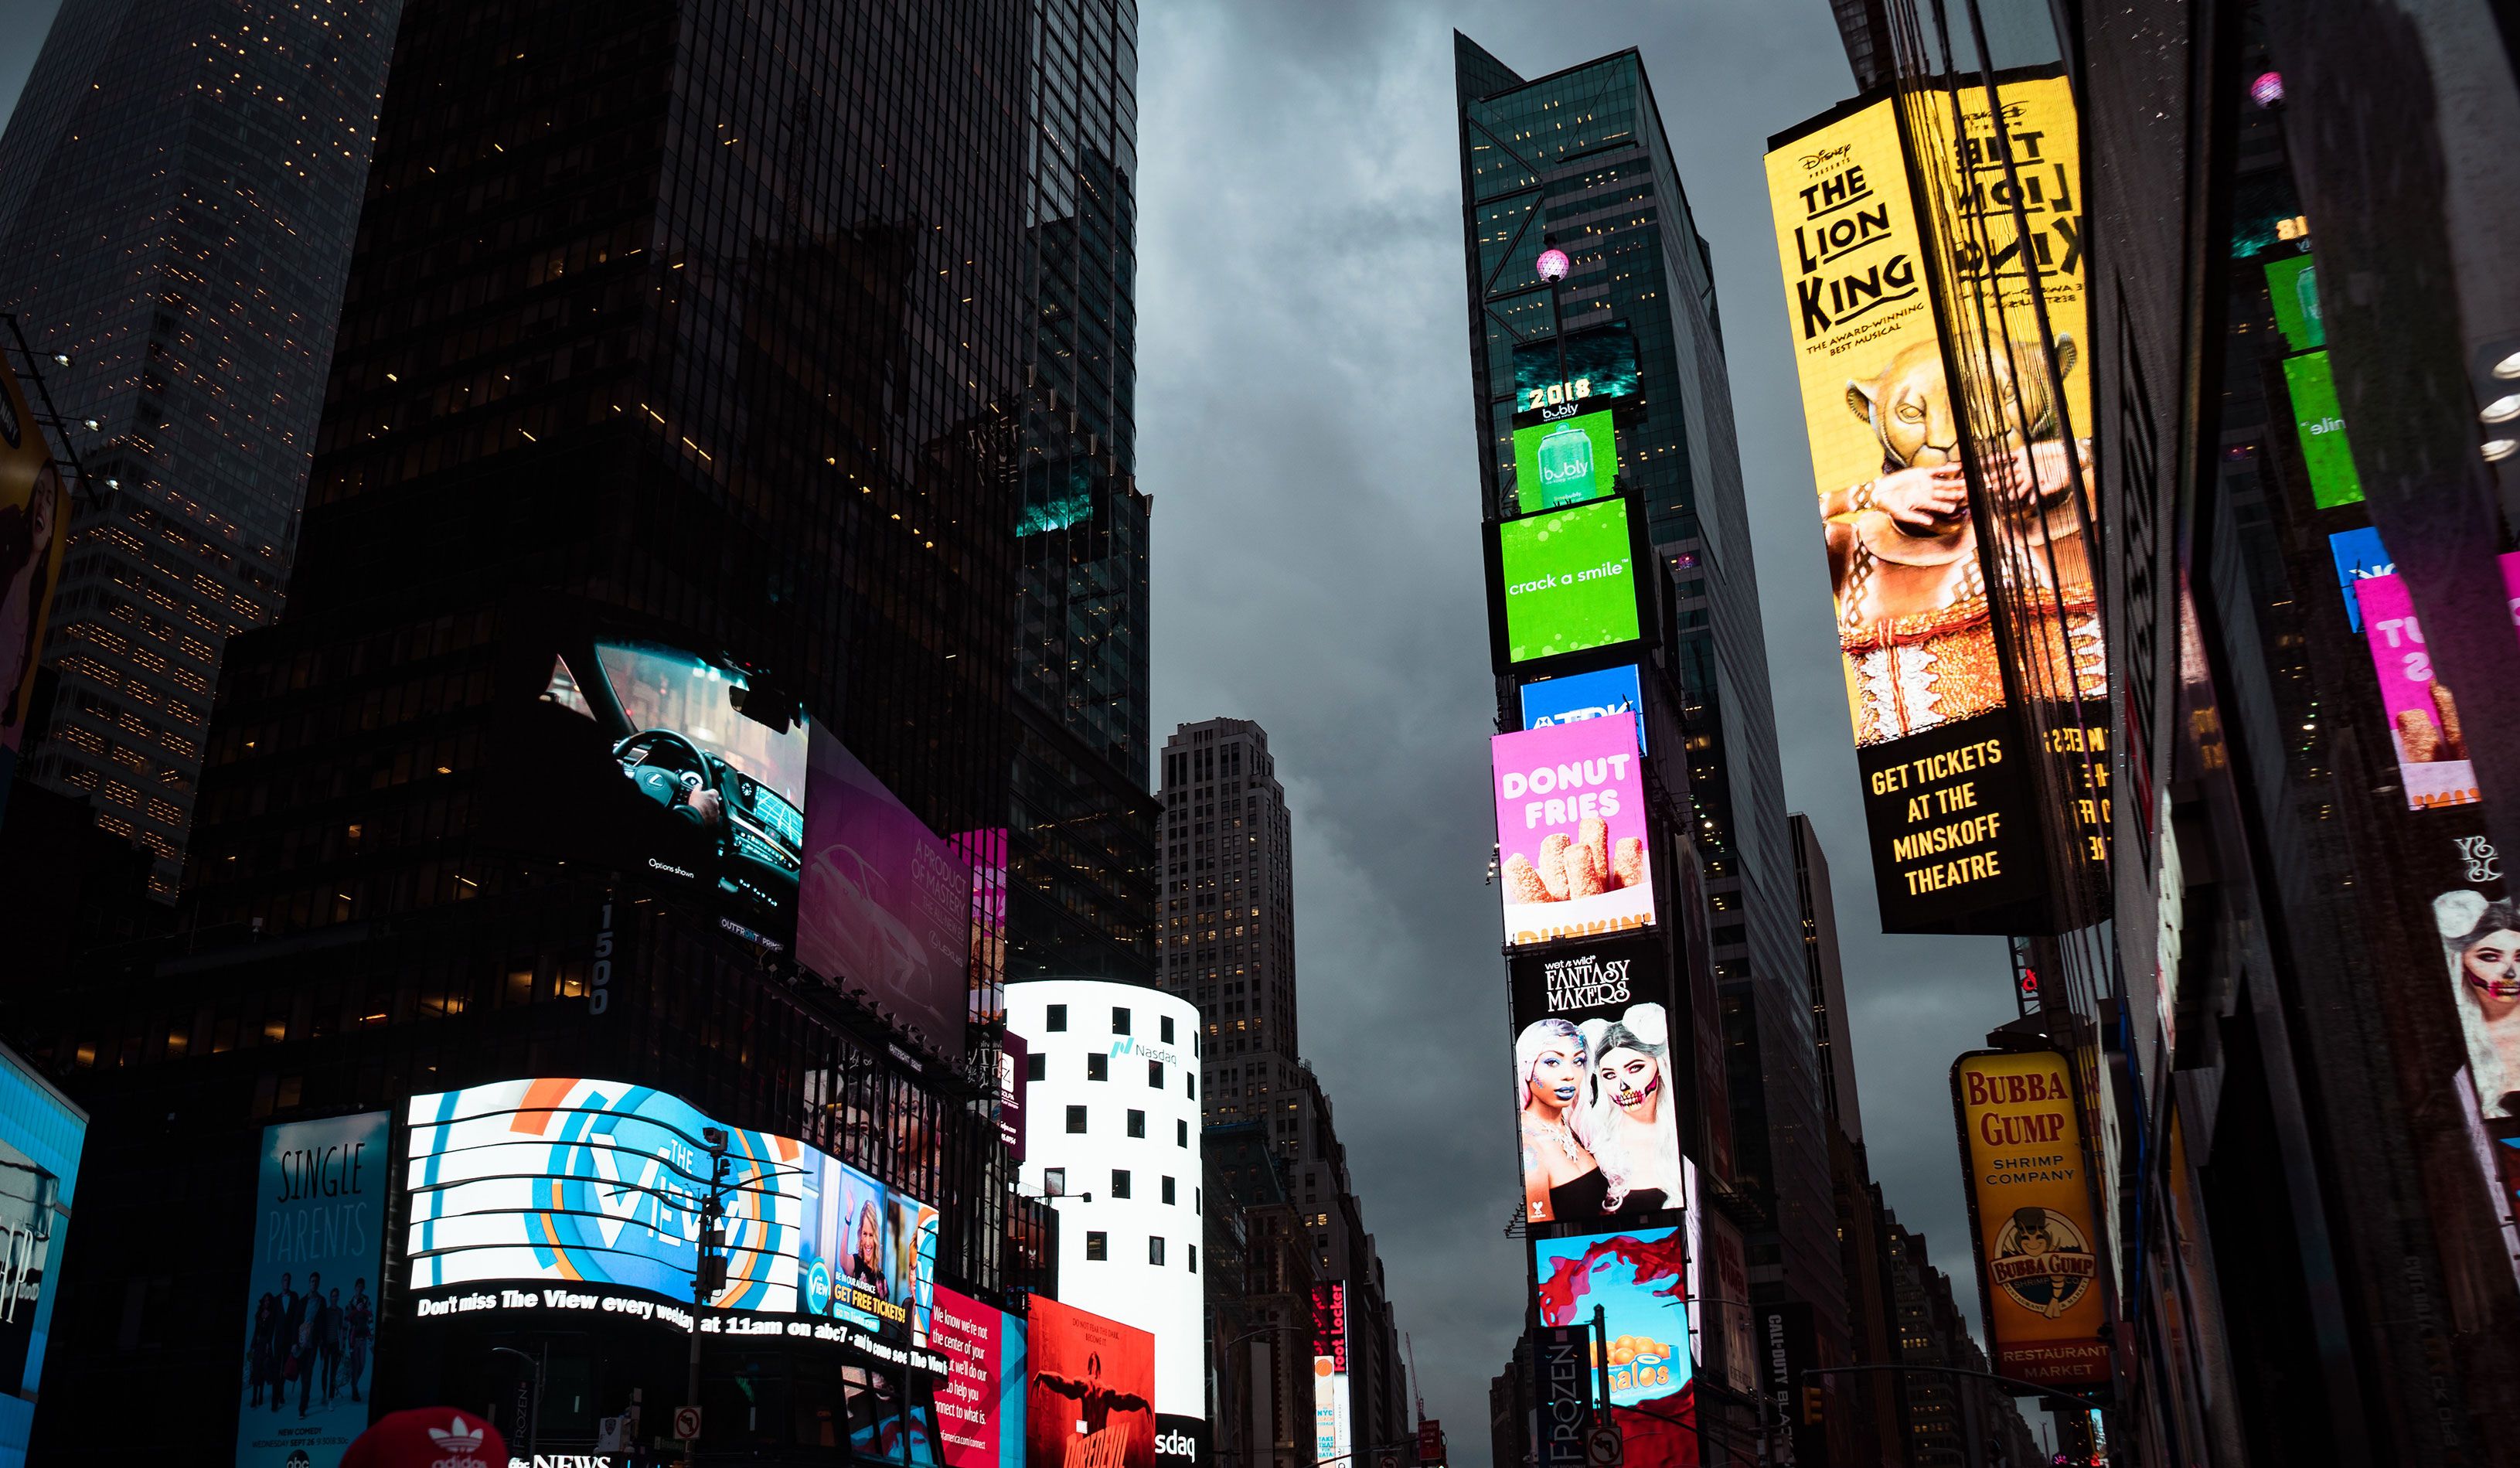 Tall New York buildings pictured with bright and colorful Digital Signage and Displays